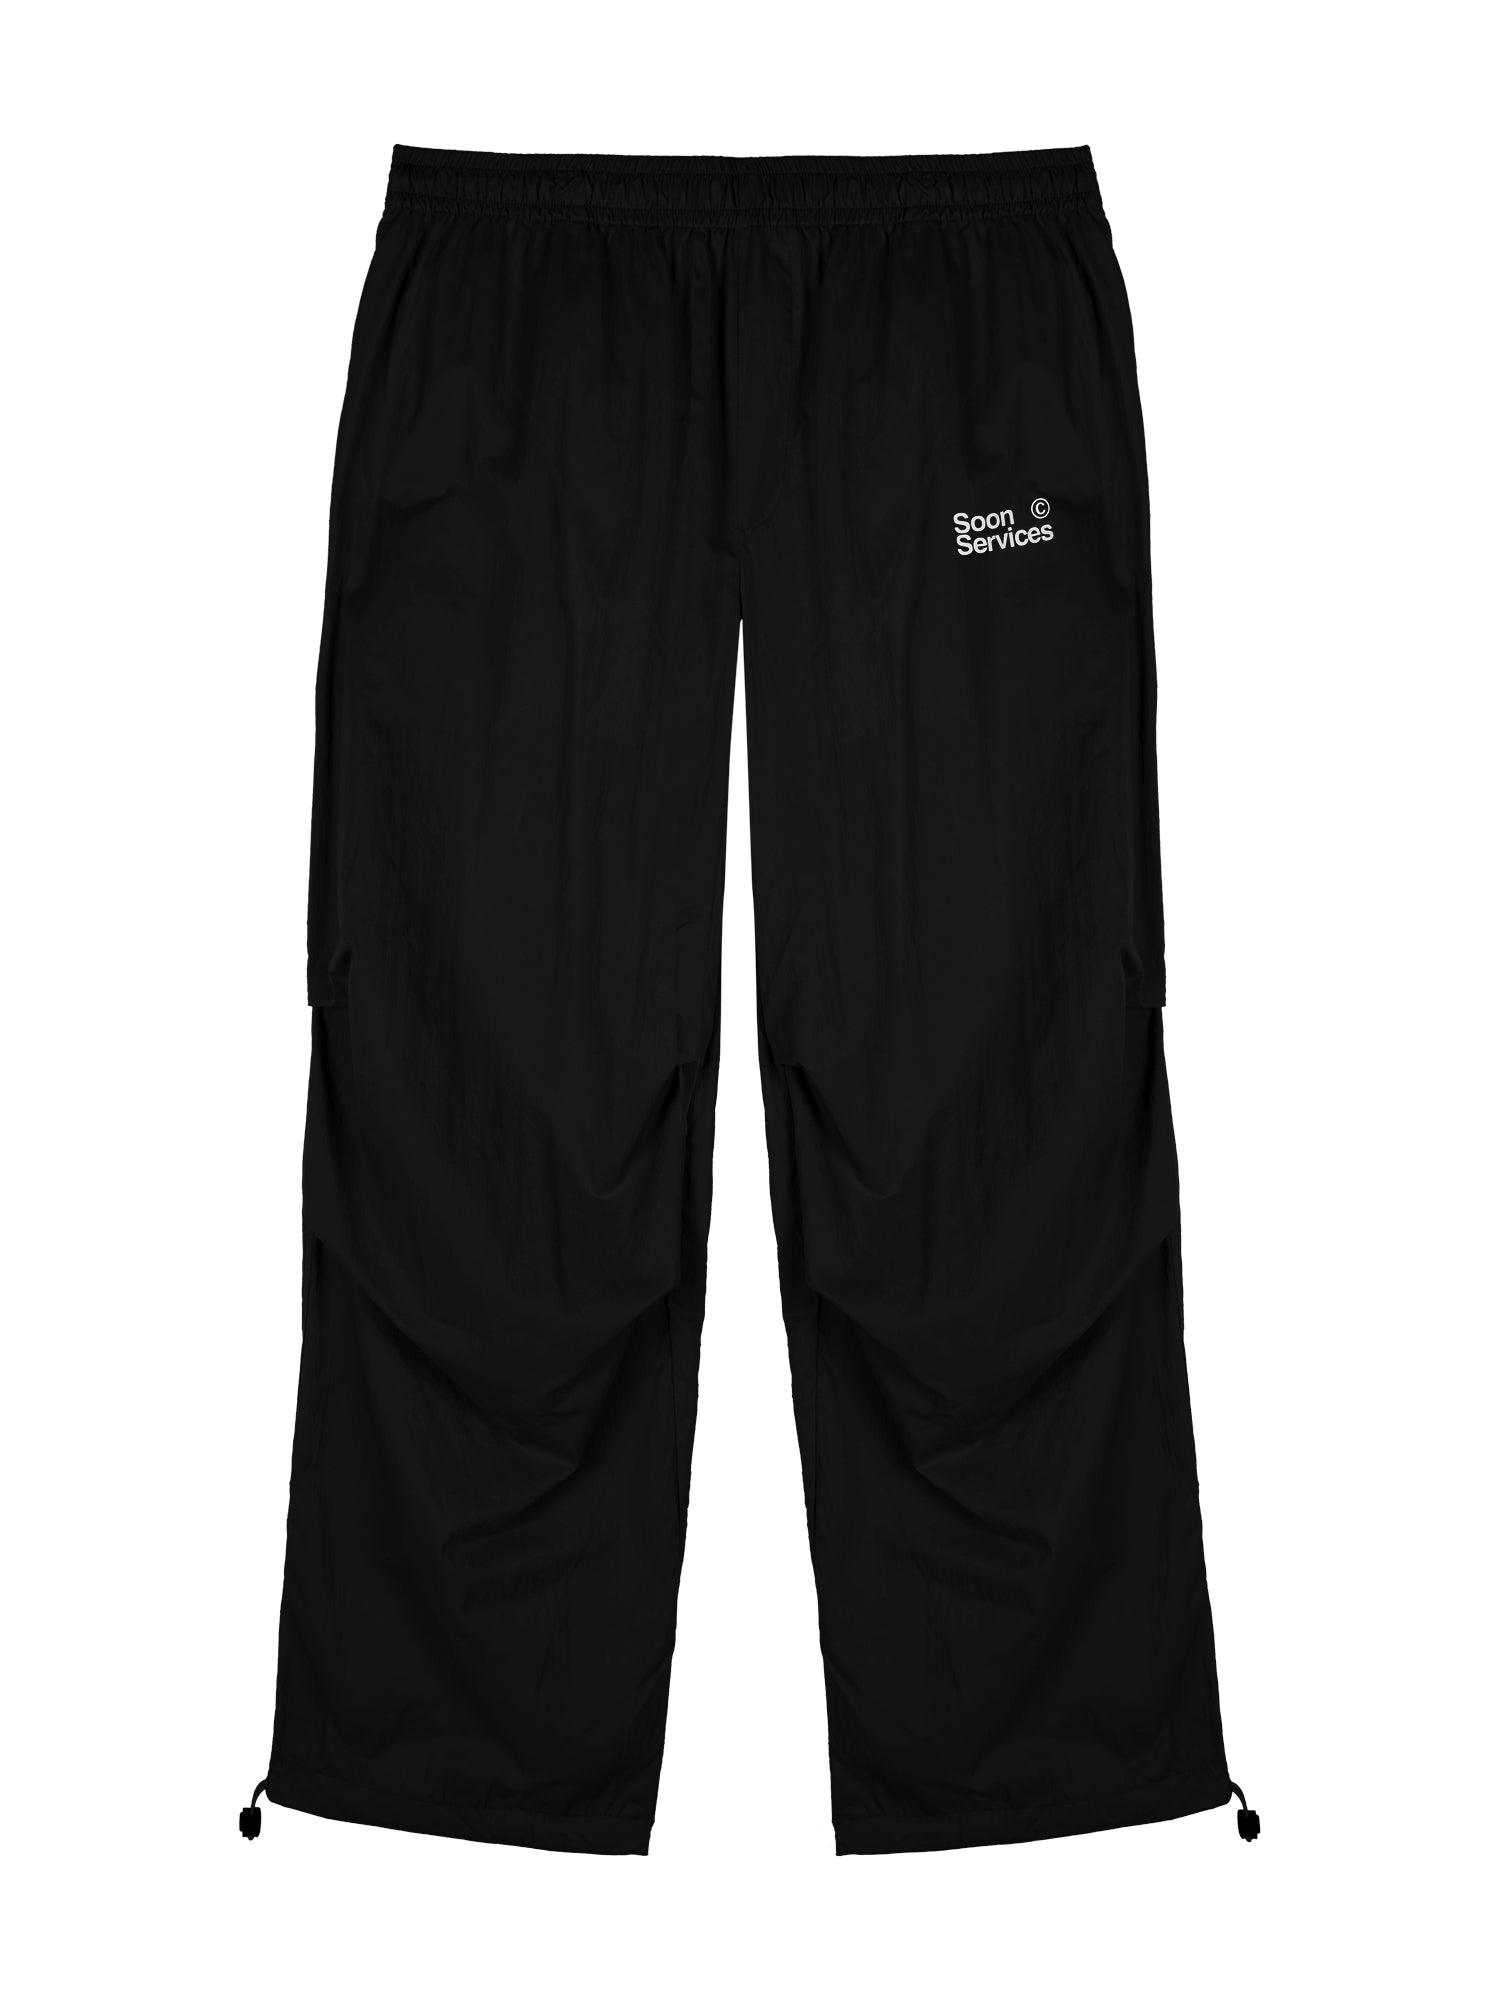 Soon Services Track Pants - SOON TO BE ANNOUNCED